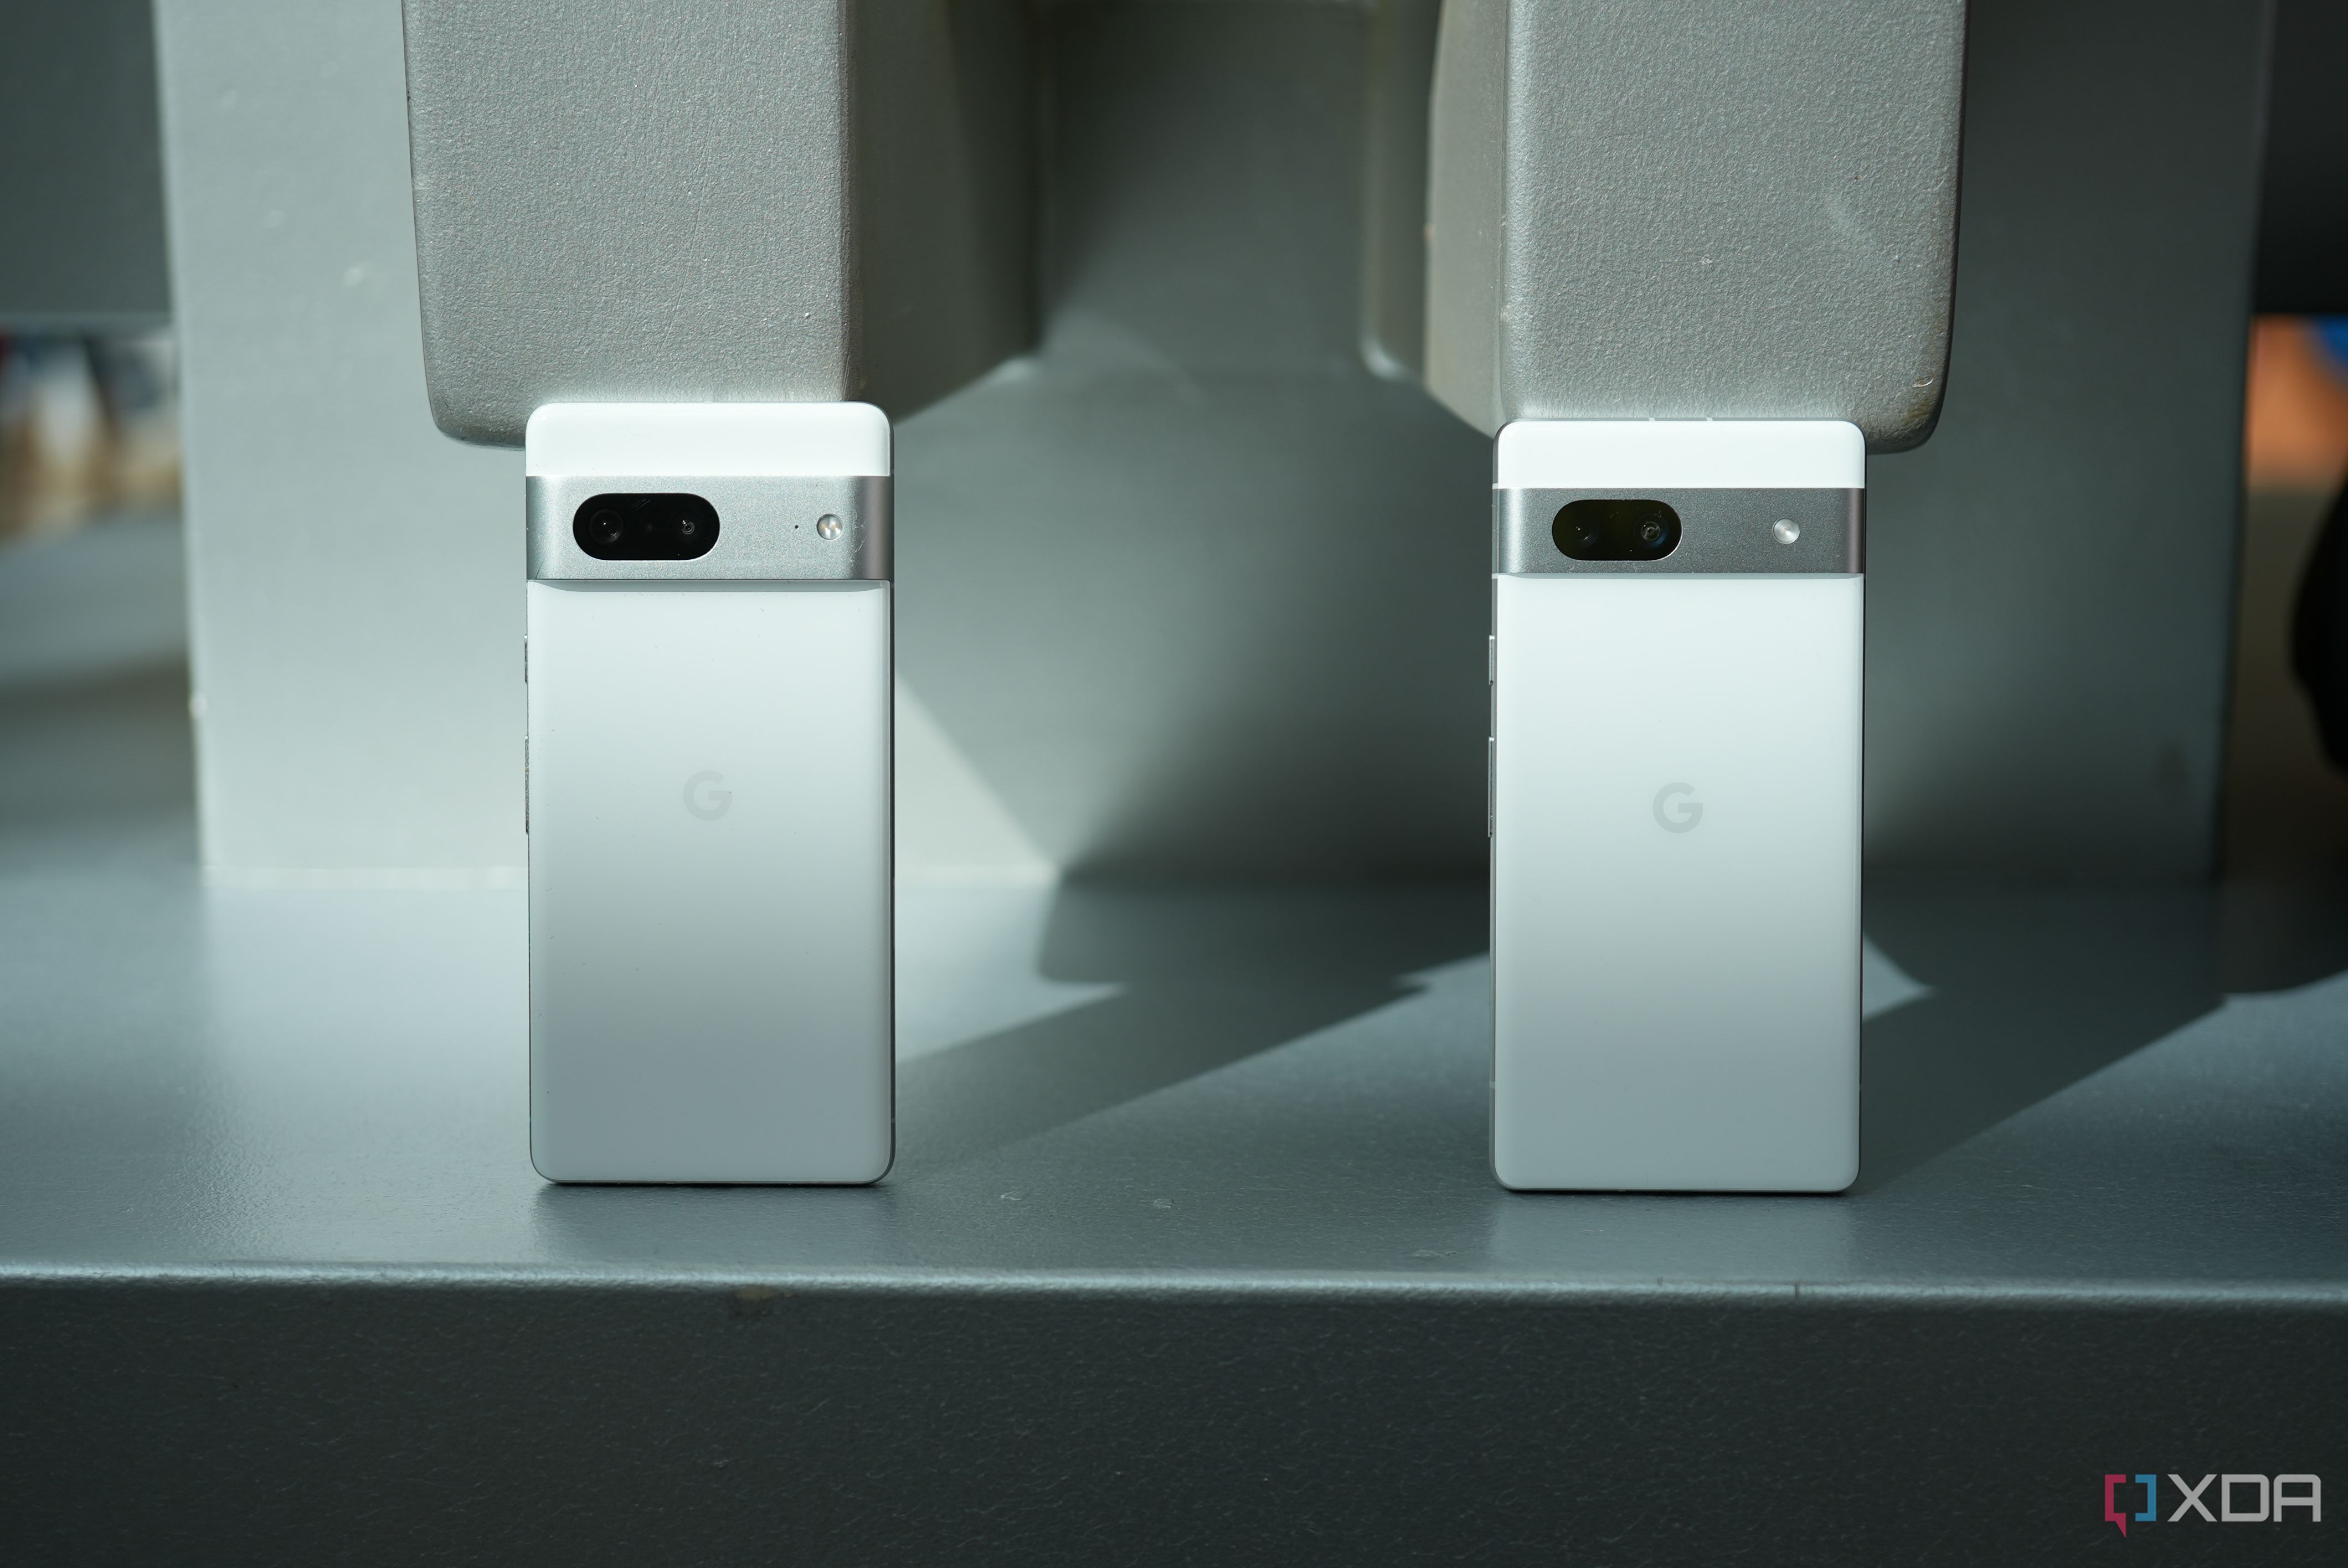 Pixel 7 (left) and Pixel 7a (right) side by side